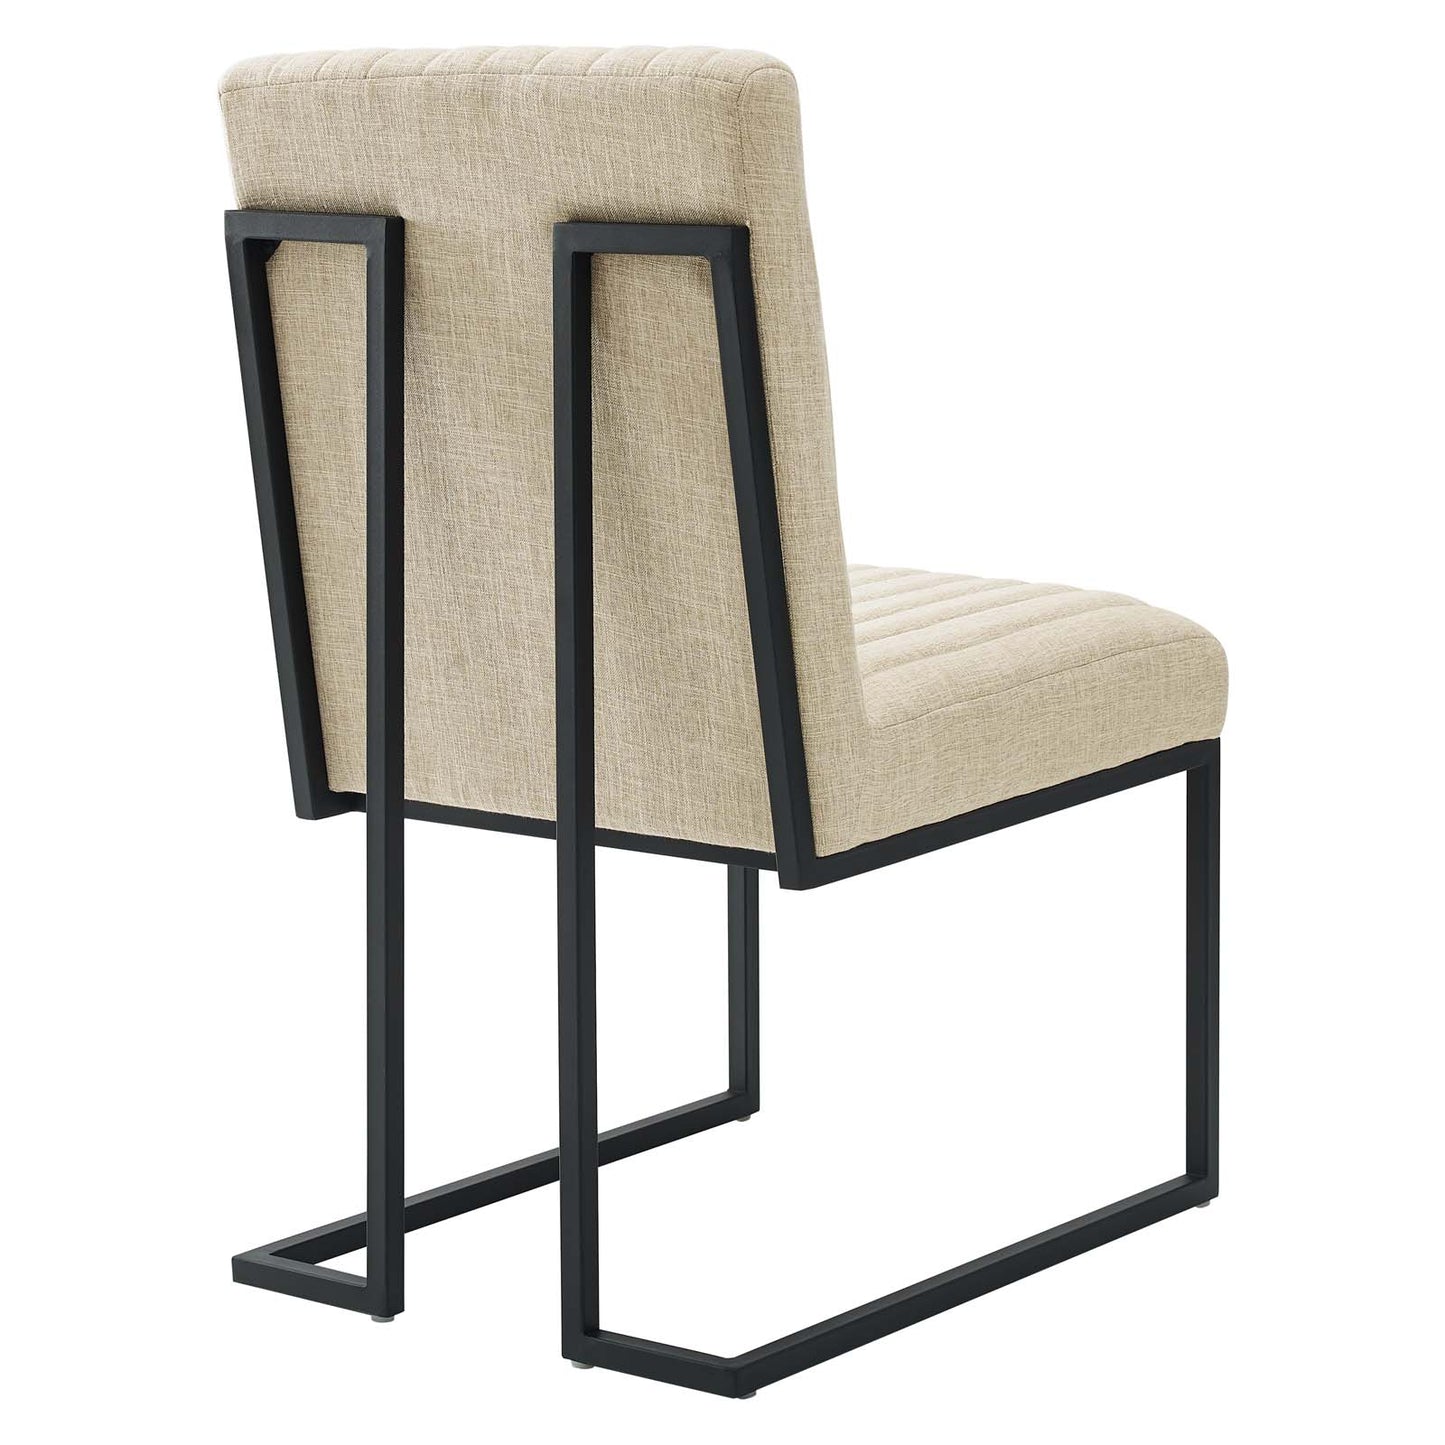 Indulge Channel Tufted Fabric Dining Chair Beige EEI-4652-BEI